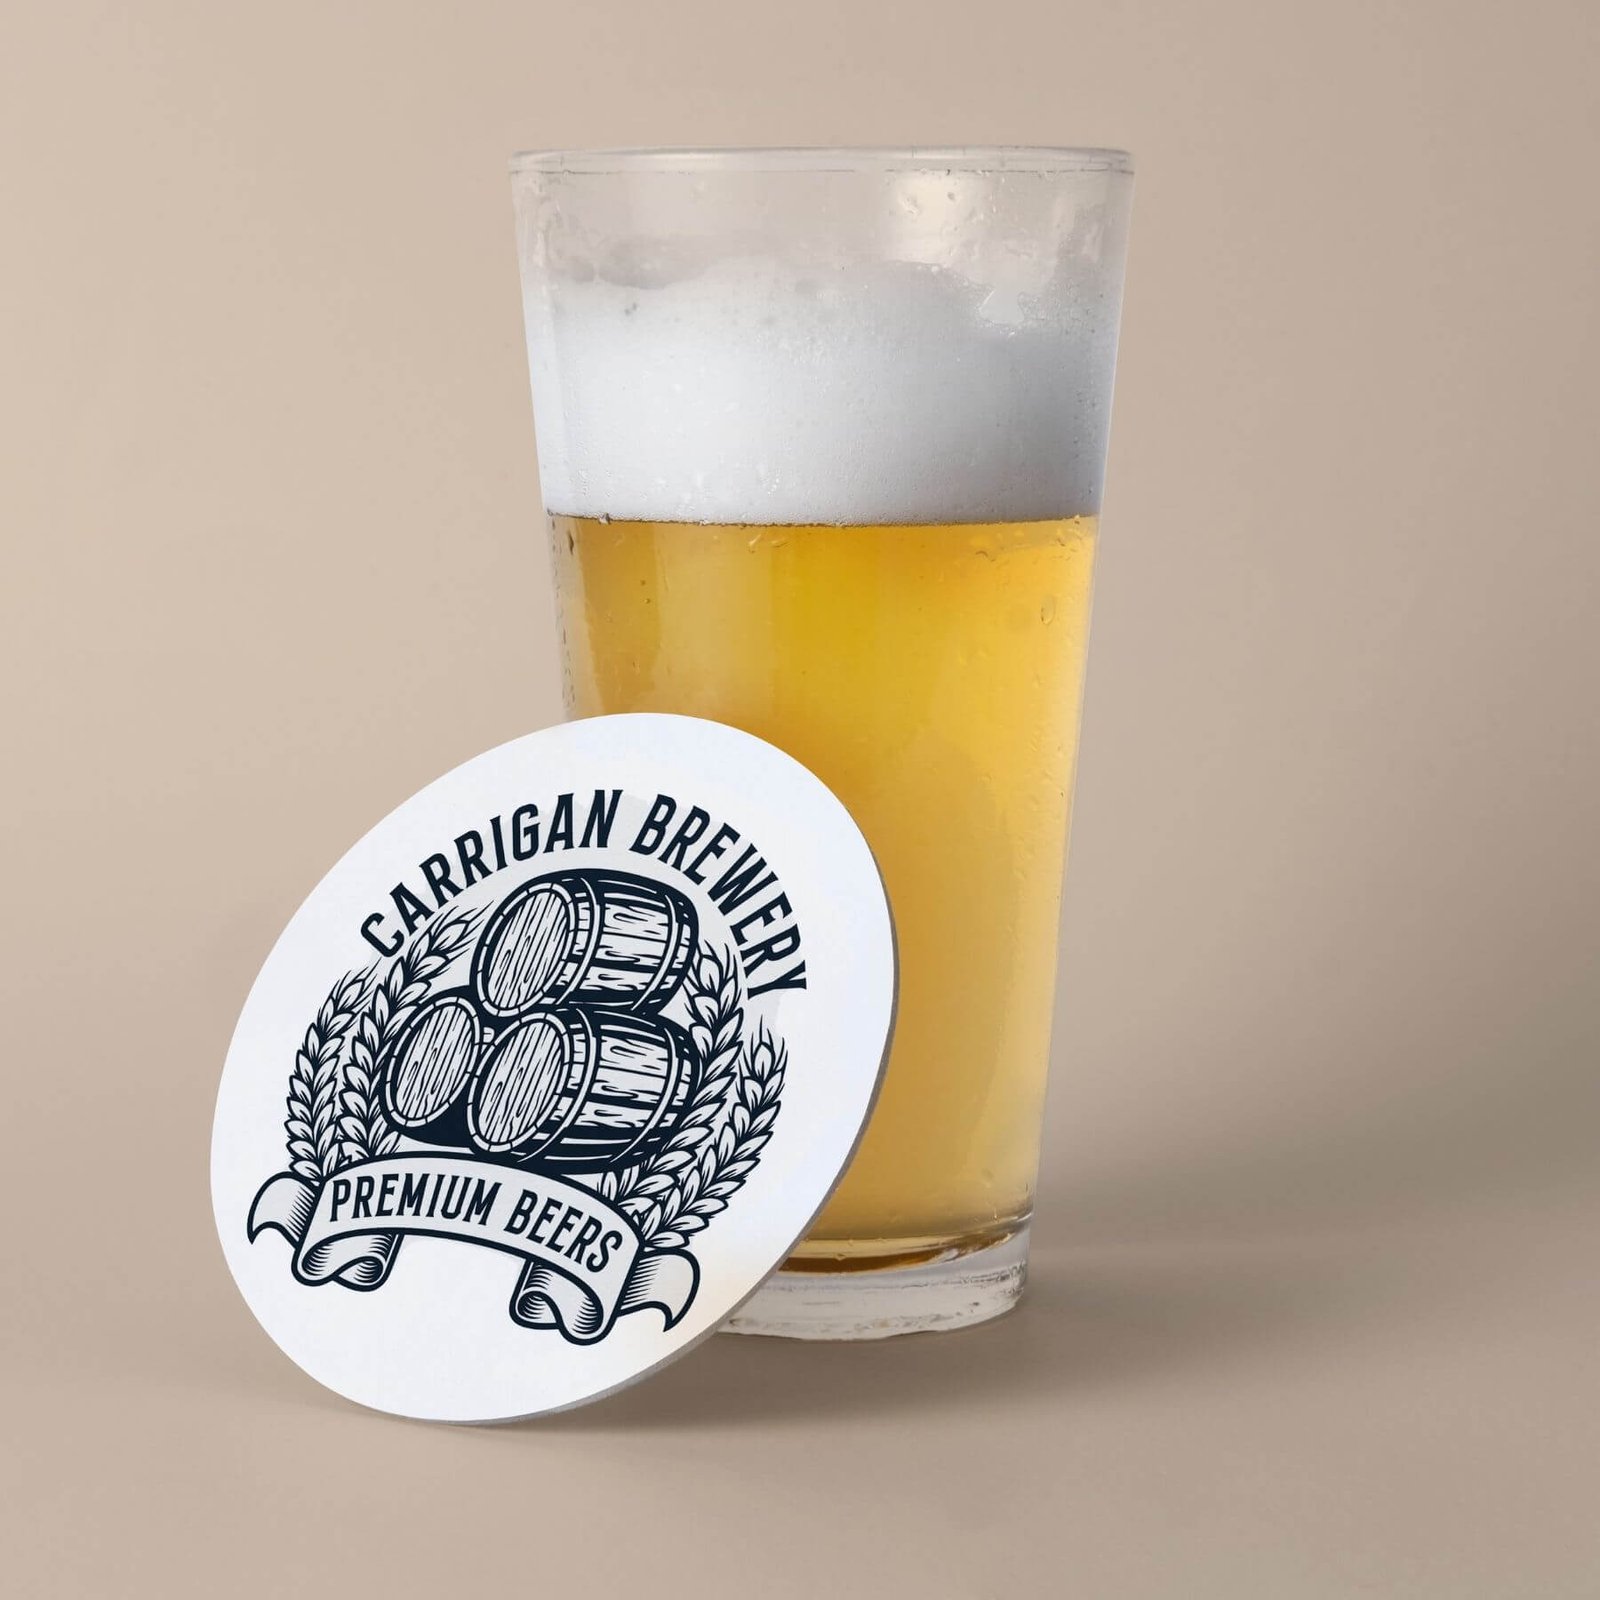 Carrigan Brewery - Carrigan Brewing Company Coaster Designed by Finnix Solutions